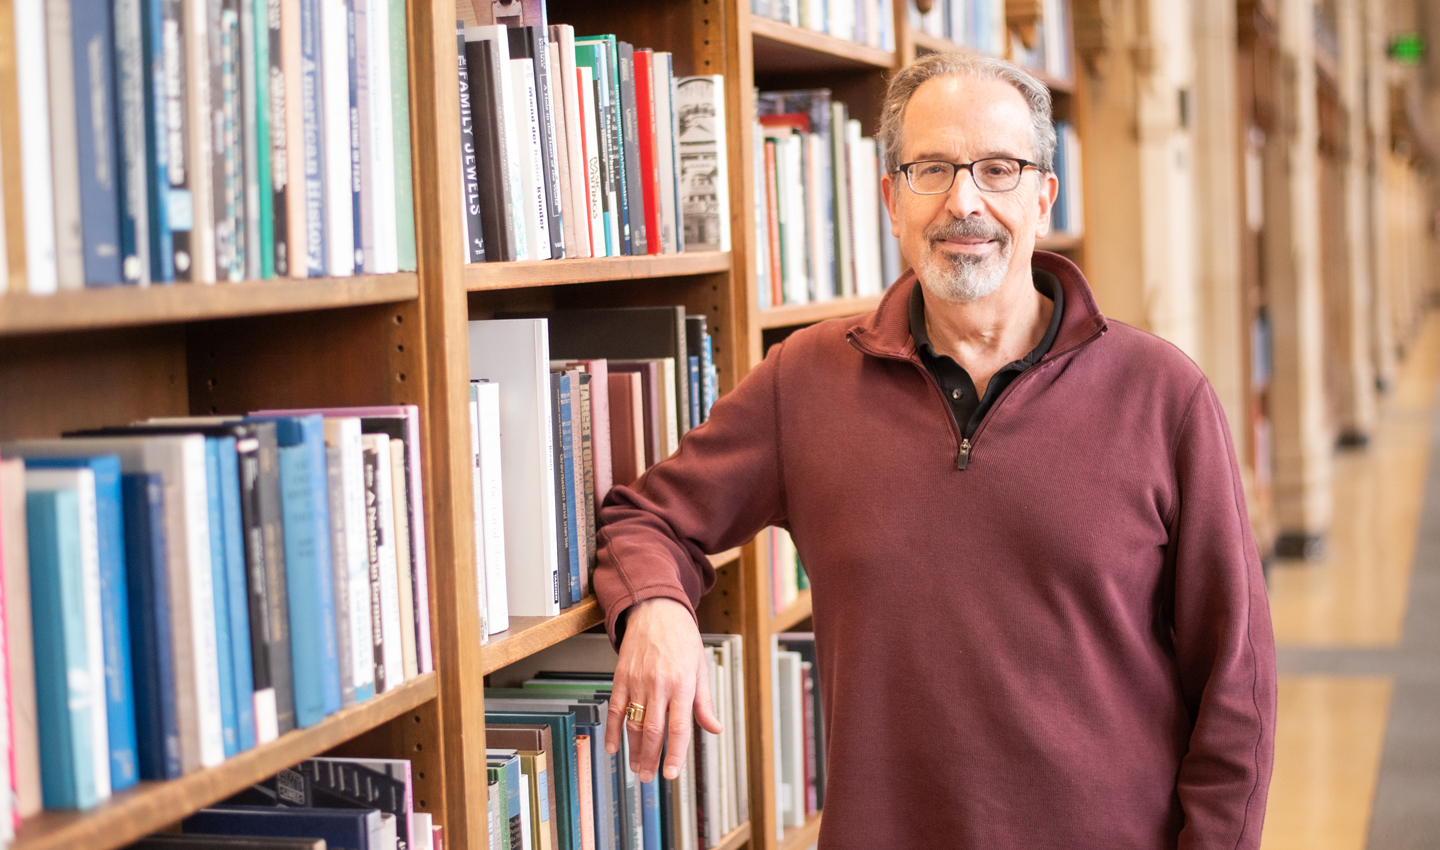 David Levy stands among the bookshelves at Suzzallo Library.